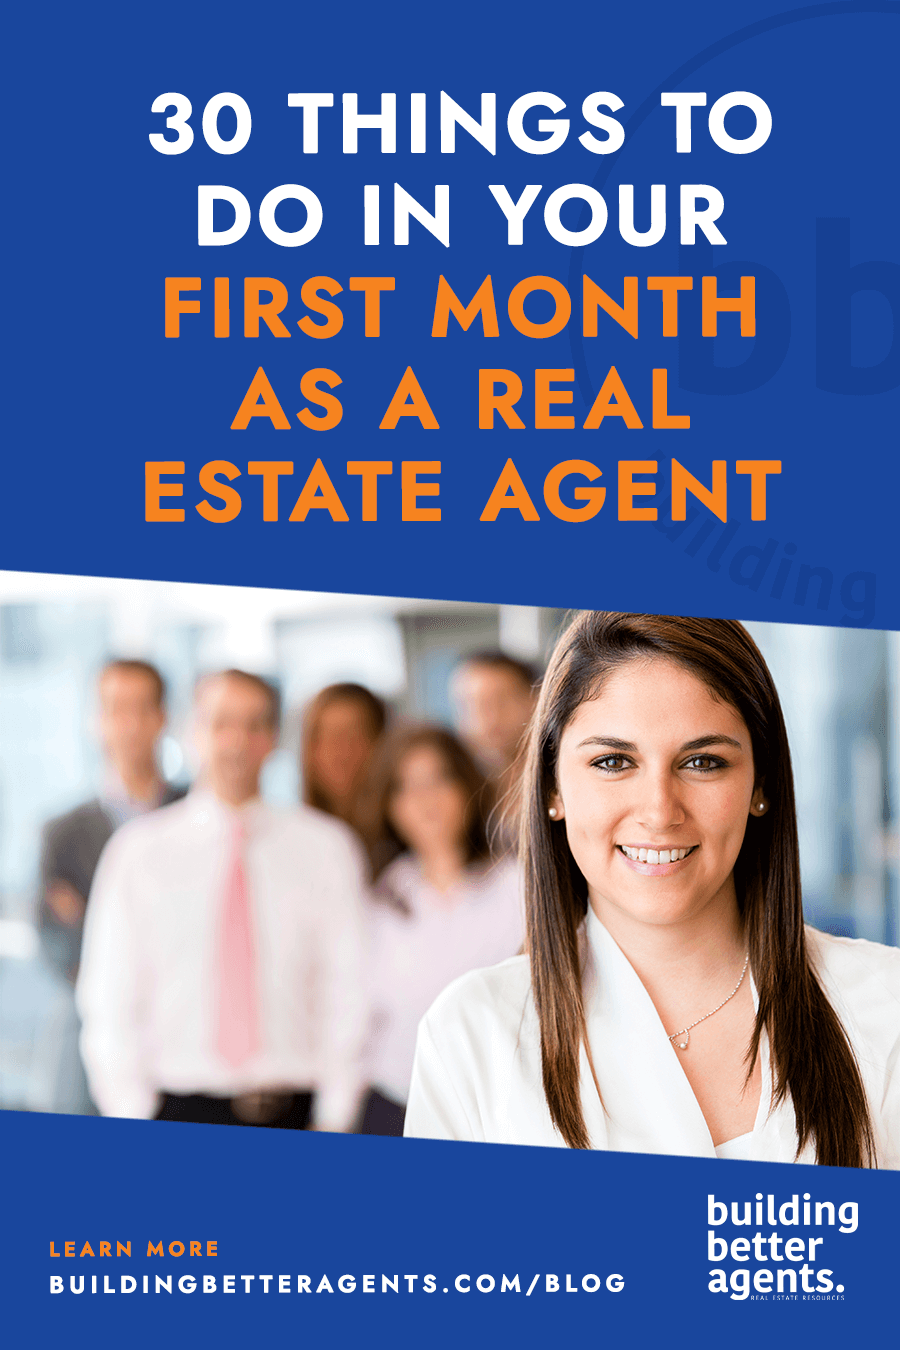 30 Things to Do in Your First Month as a Real Estate Agent